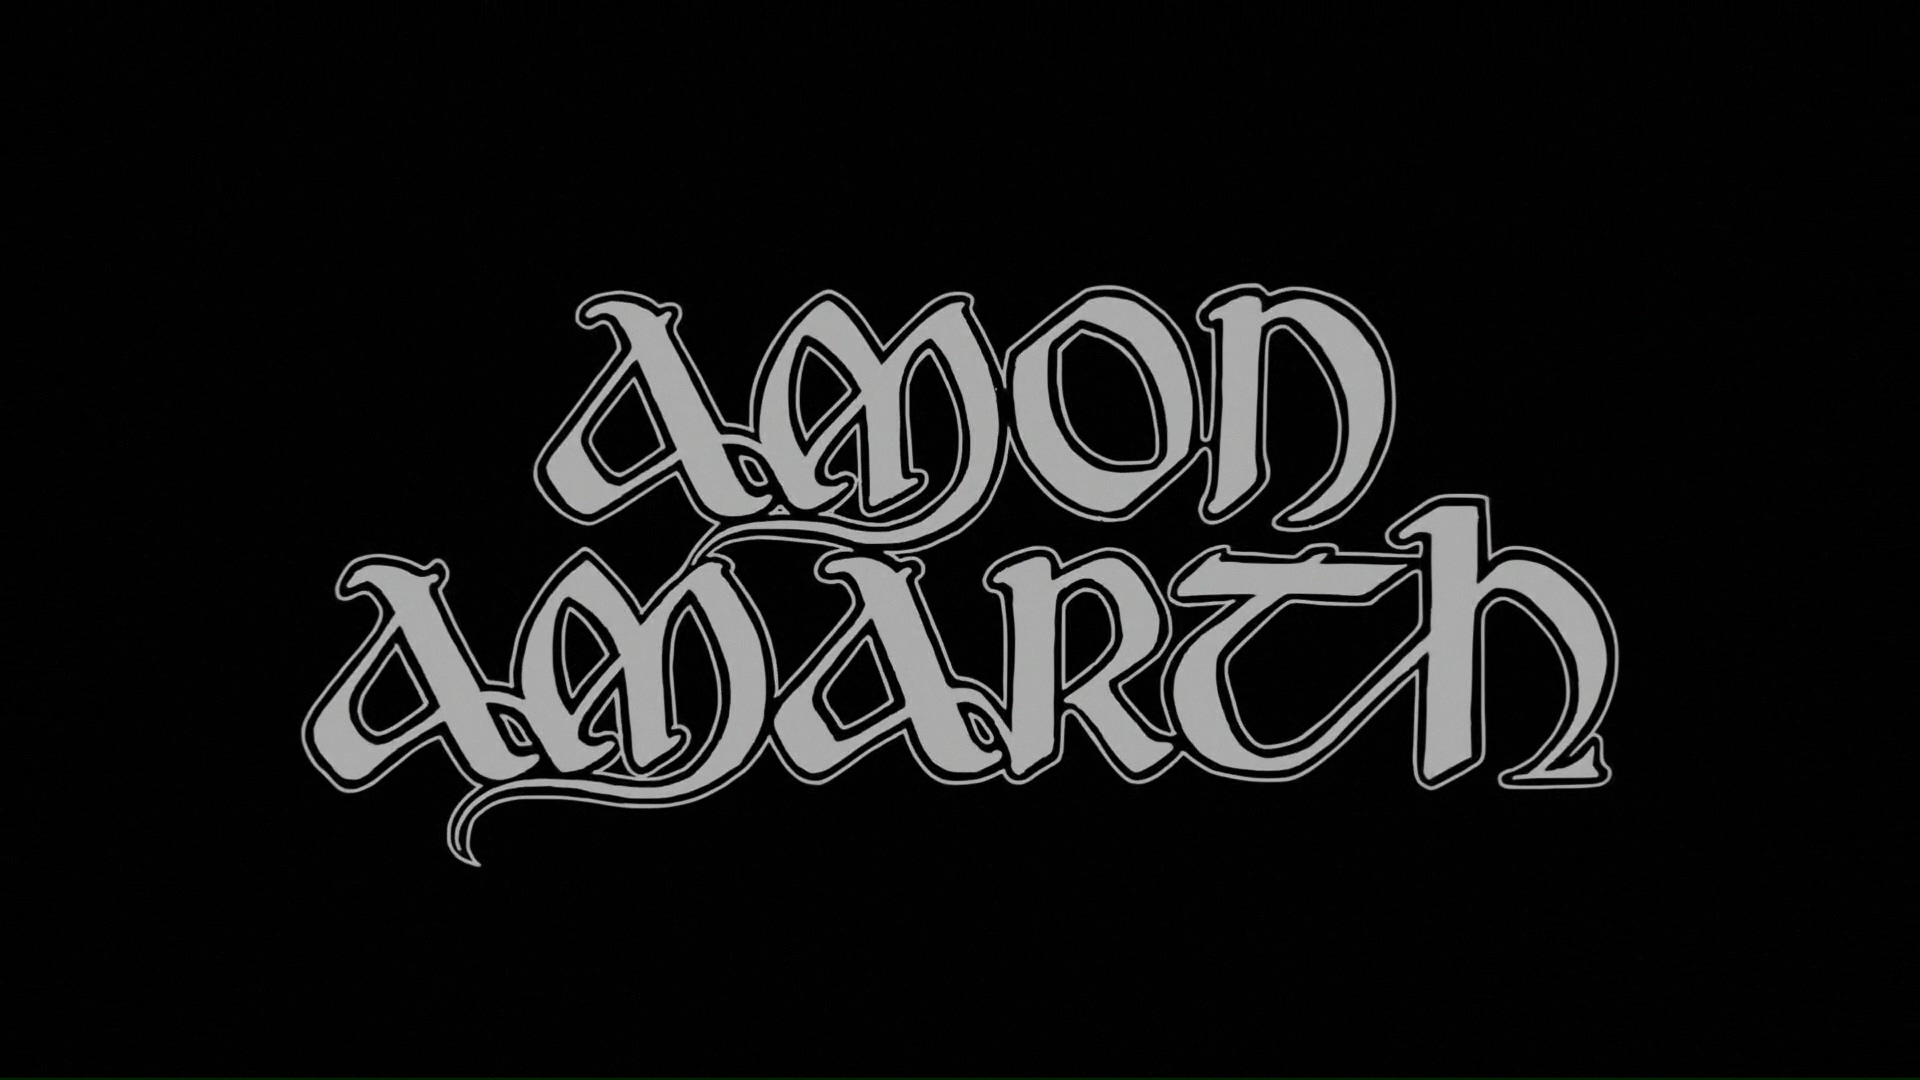 00002.m2ts(Amon Amarth -The Pursuit Of Vikings - 25 Years In The Eye Of The Storm 2018 1080p Blu-ray AVC DTS-HD MA 5.1 -FKKHD)_20181122_183248.465.jpg